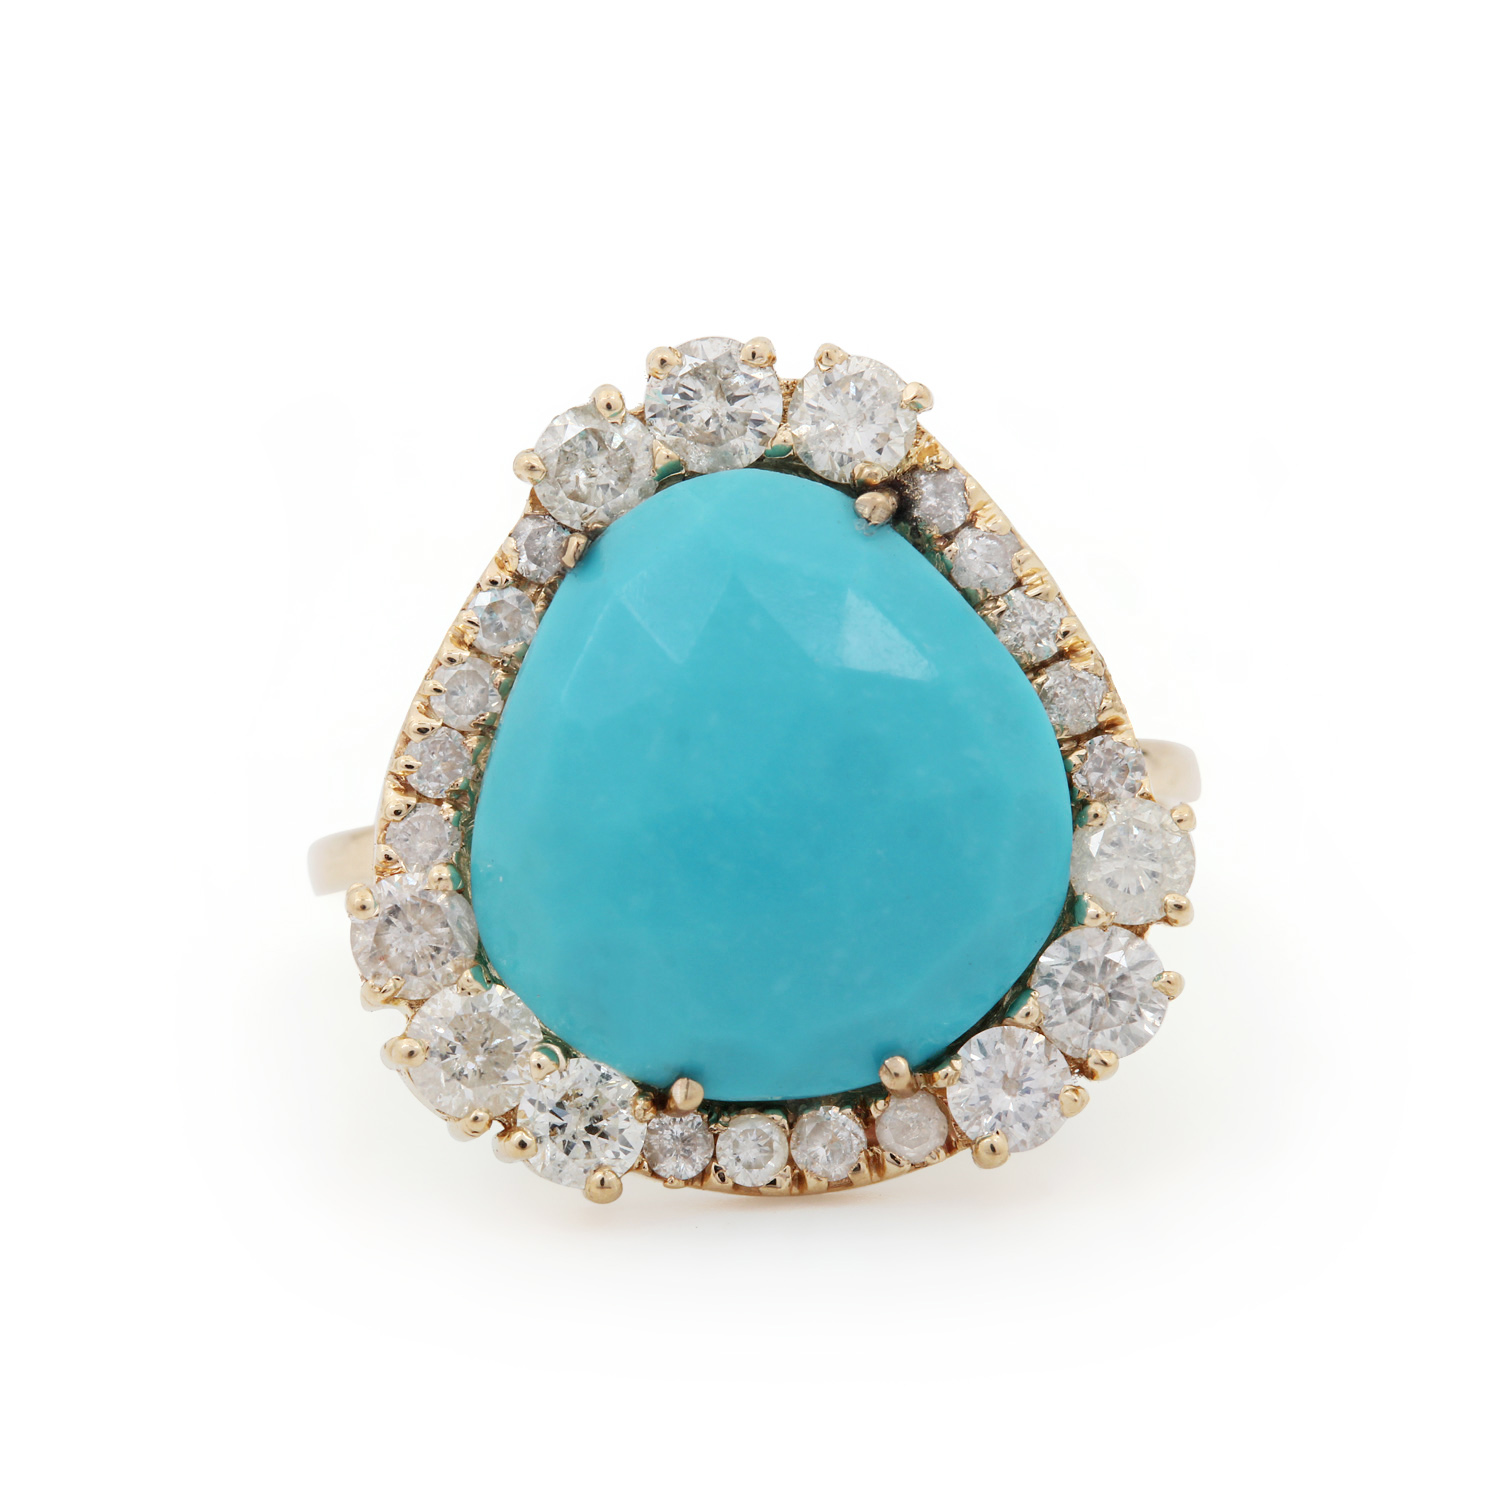 Turquoise 14K Solid Gold Ring Pave Diamond Jewelry